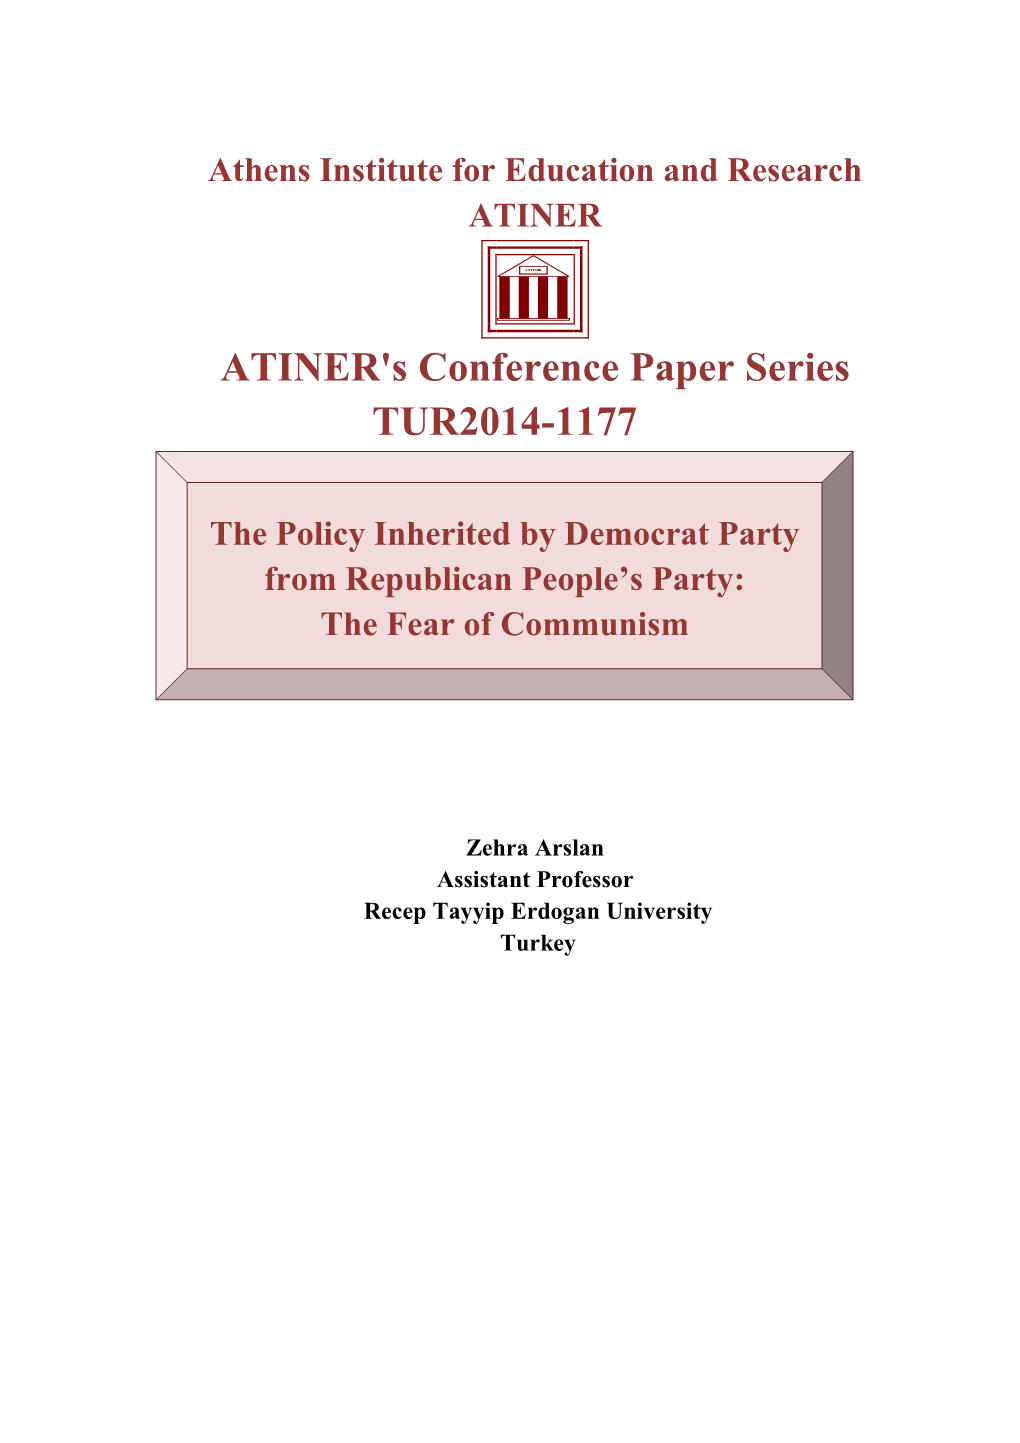 ATINER's Conference Paper Series TUR2014-1177